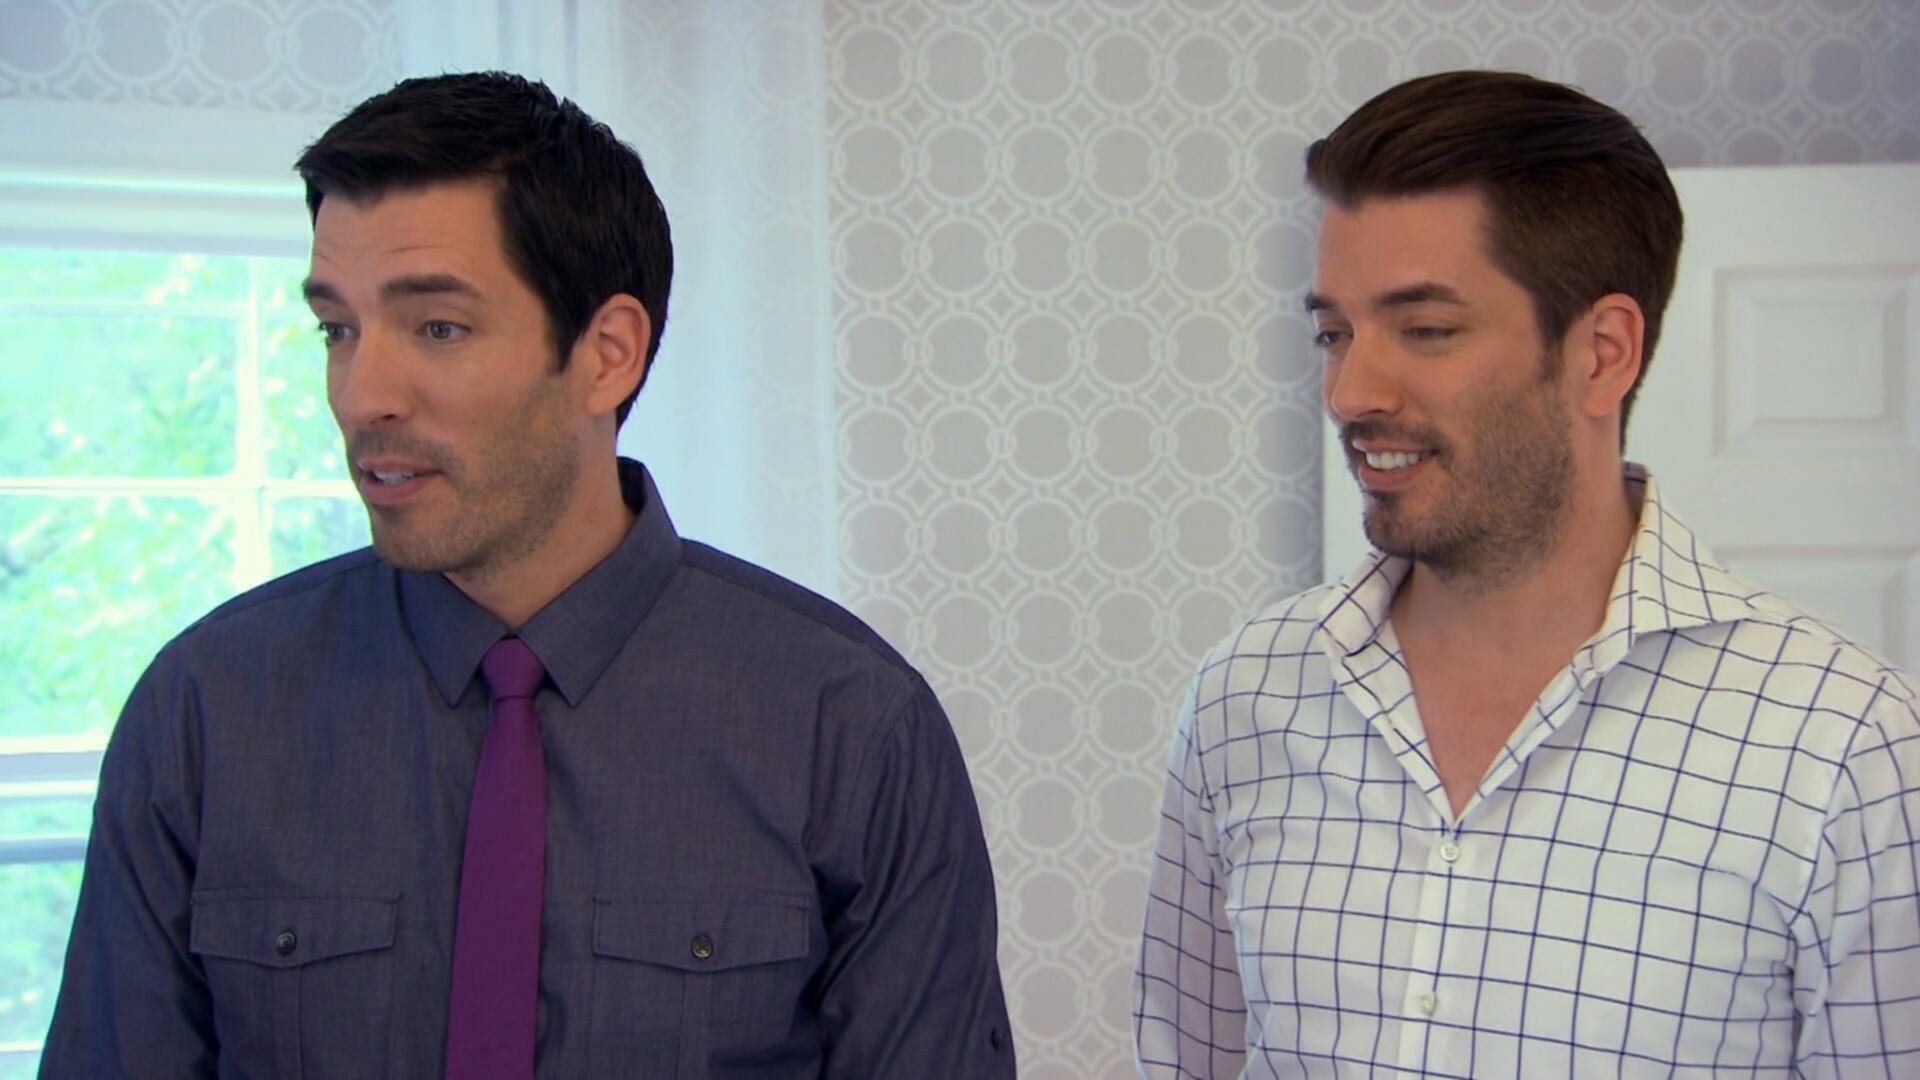 Property Brothers S08E12 More Time for Family Bridget and Tom 1080p MAX WEB DL DDP2 0 H 264 NTb TGx